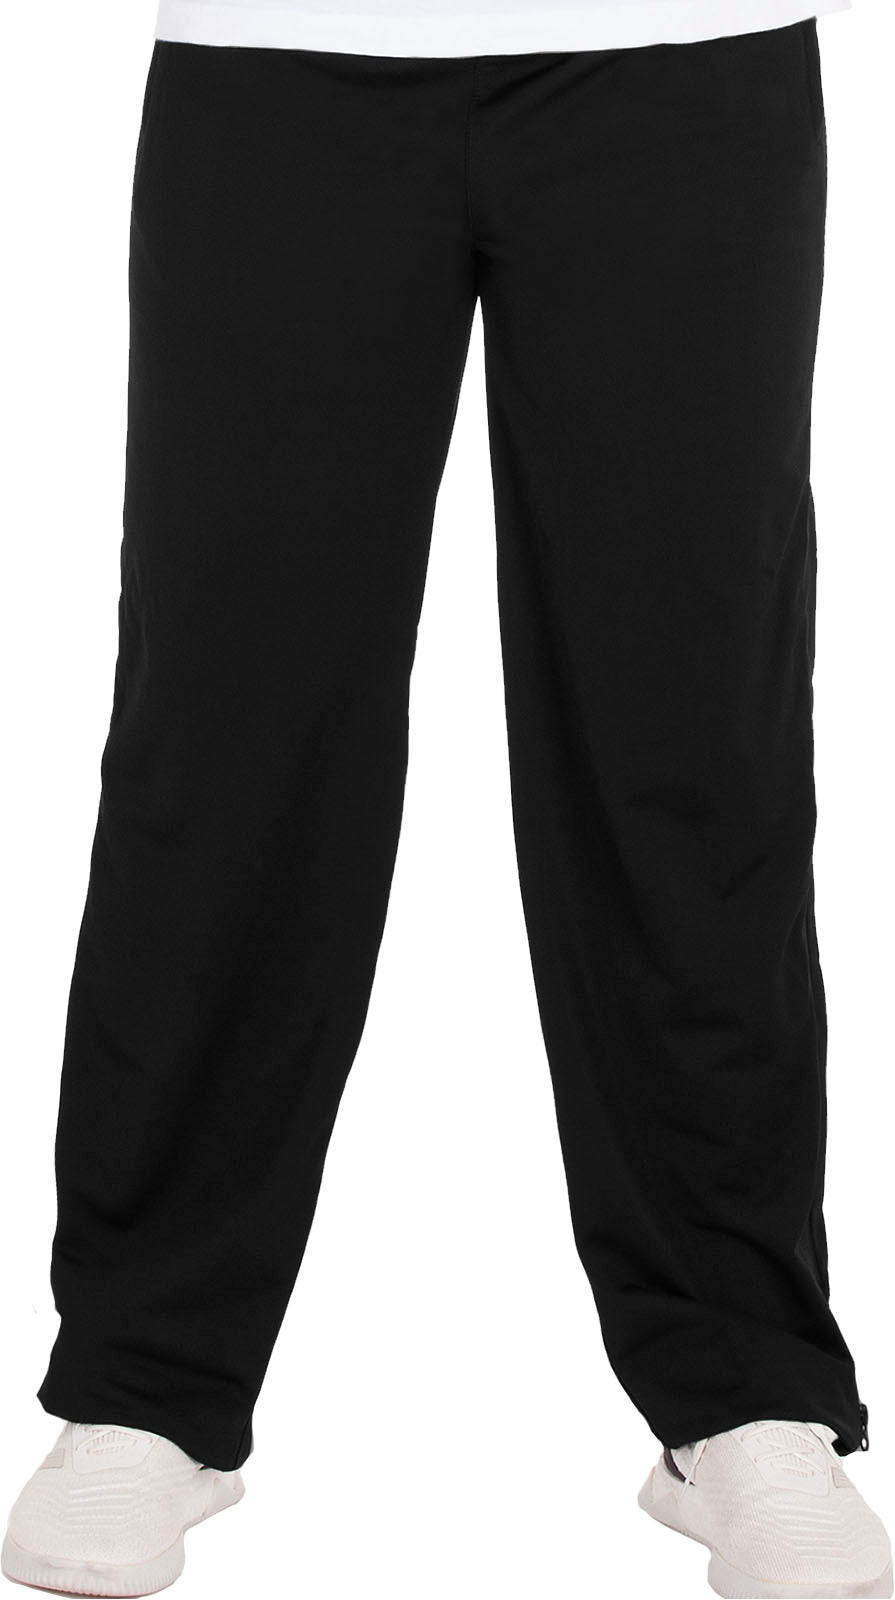 Training and leisure pants - zipper on the side